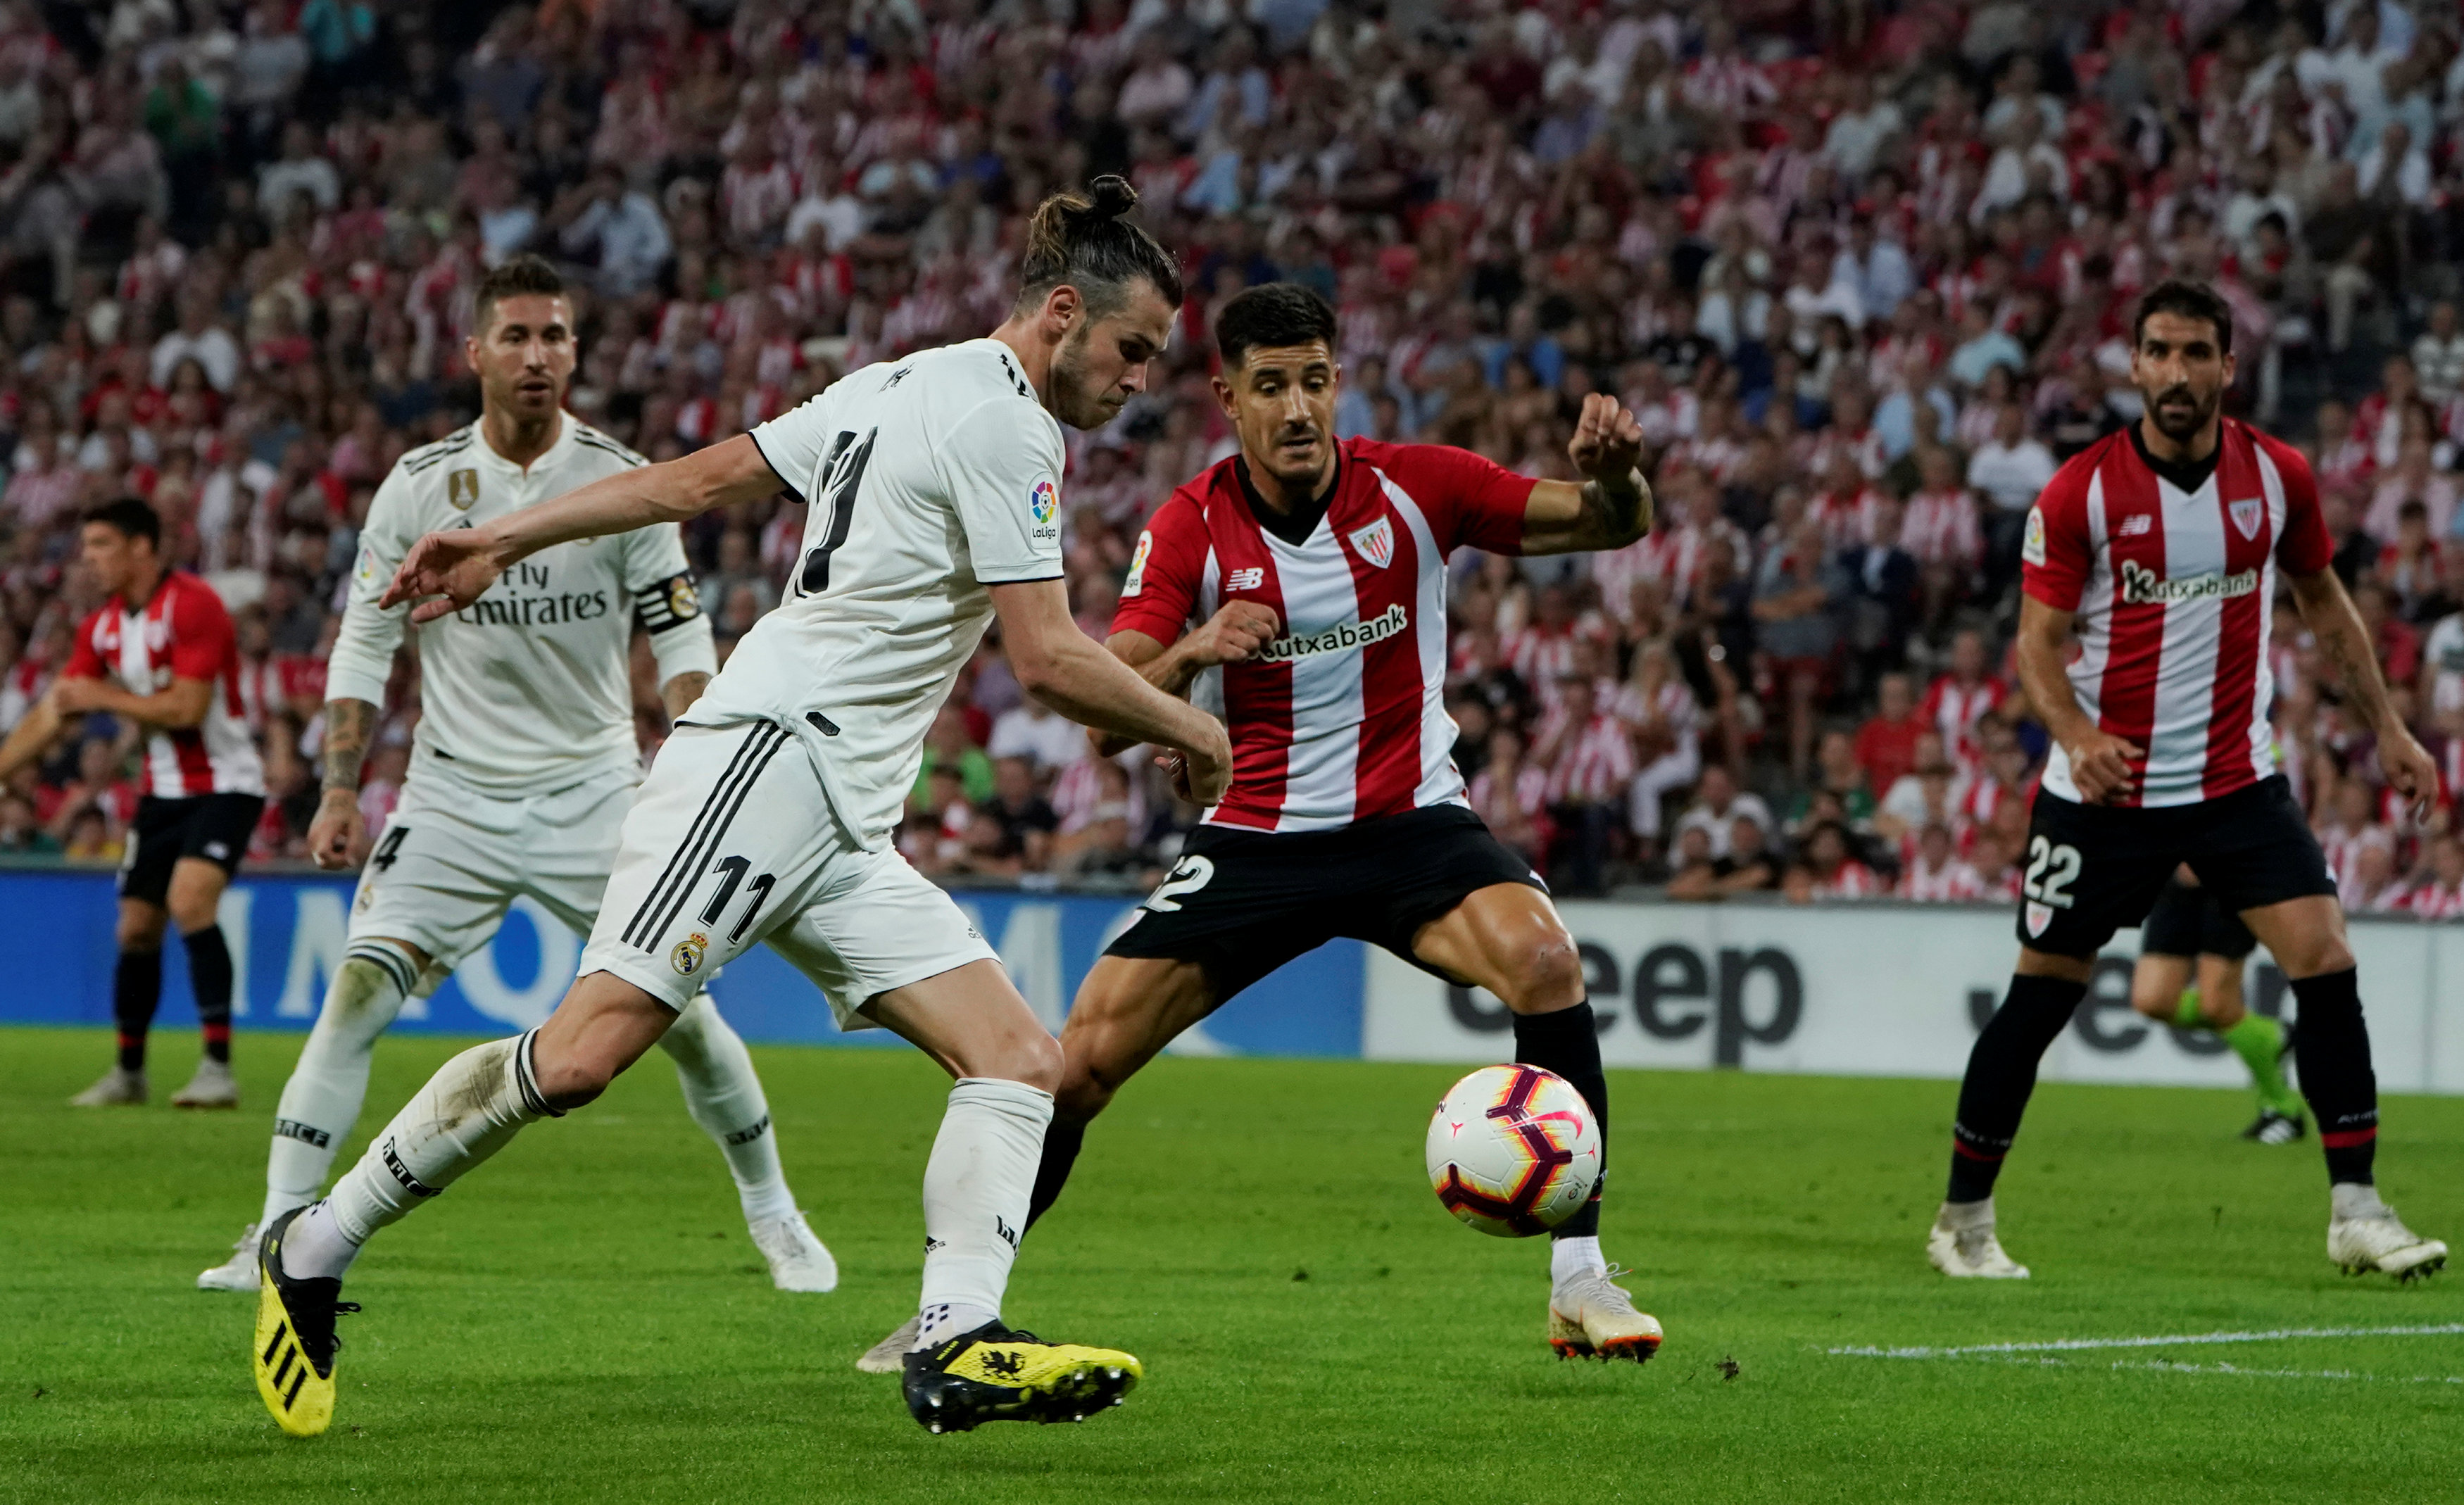 Football: Real surrender perfect start with draw in Bilbao